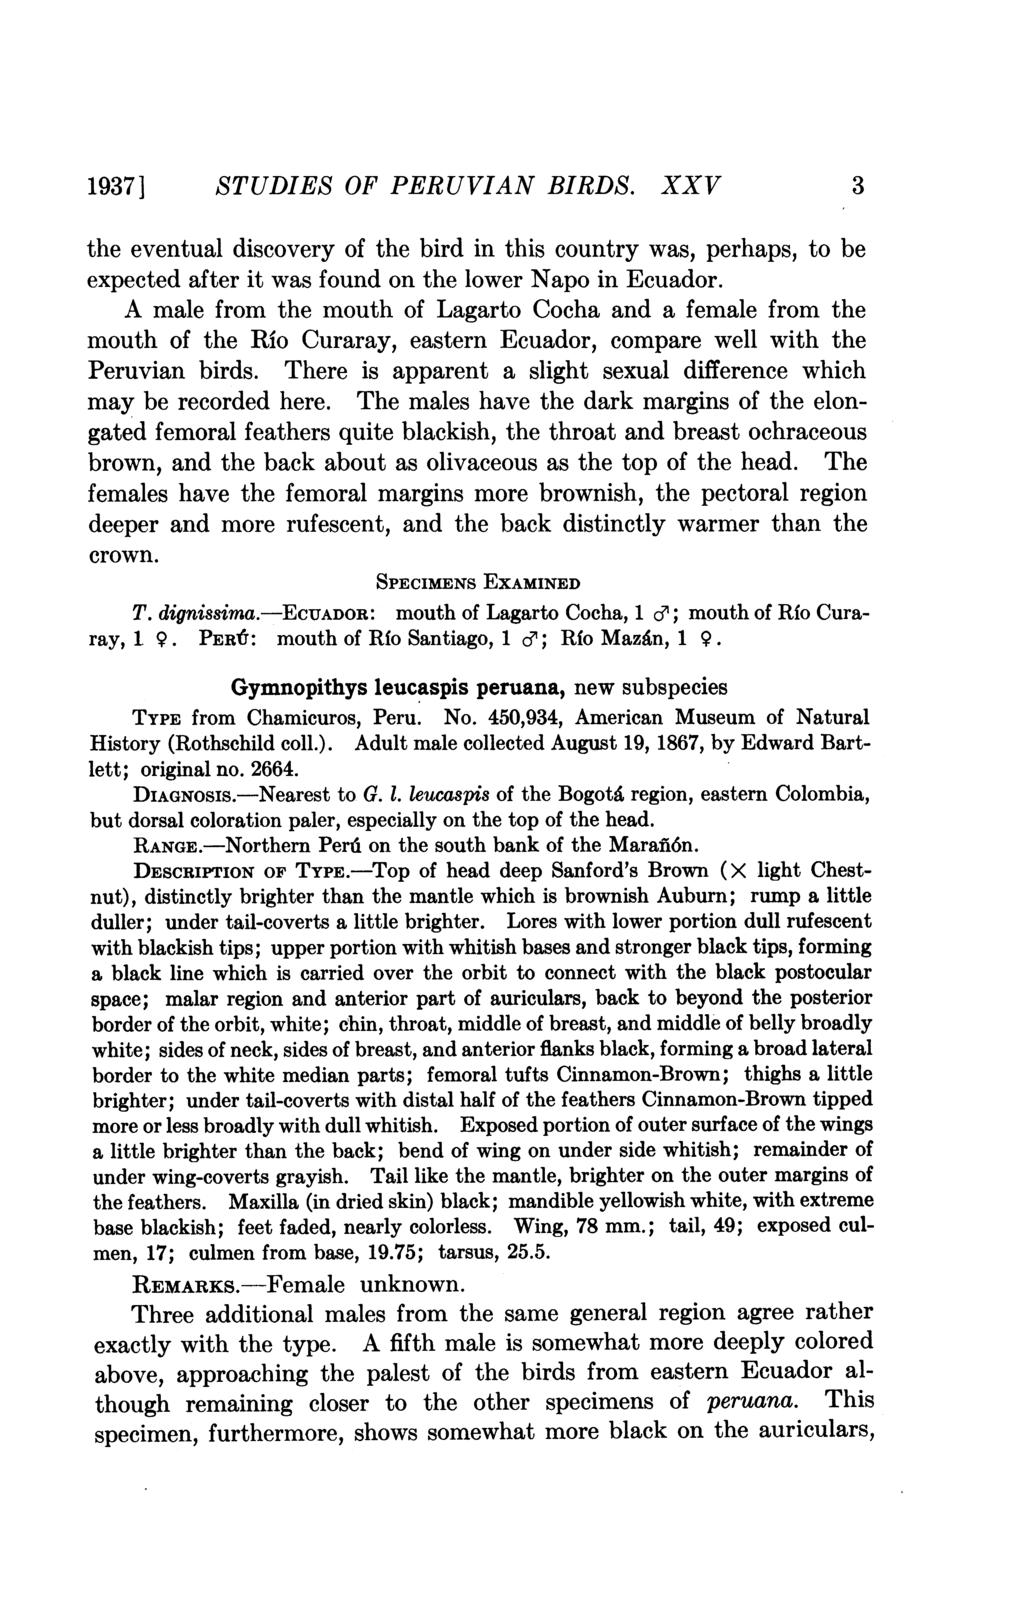 1937] STUDIES OF PERUVIAN BIRDS. XXV 3 the eventual discovery of the bird in this country was, perhaps, to be expected after it was found on the lower Napo in Ecuador.